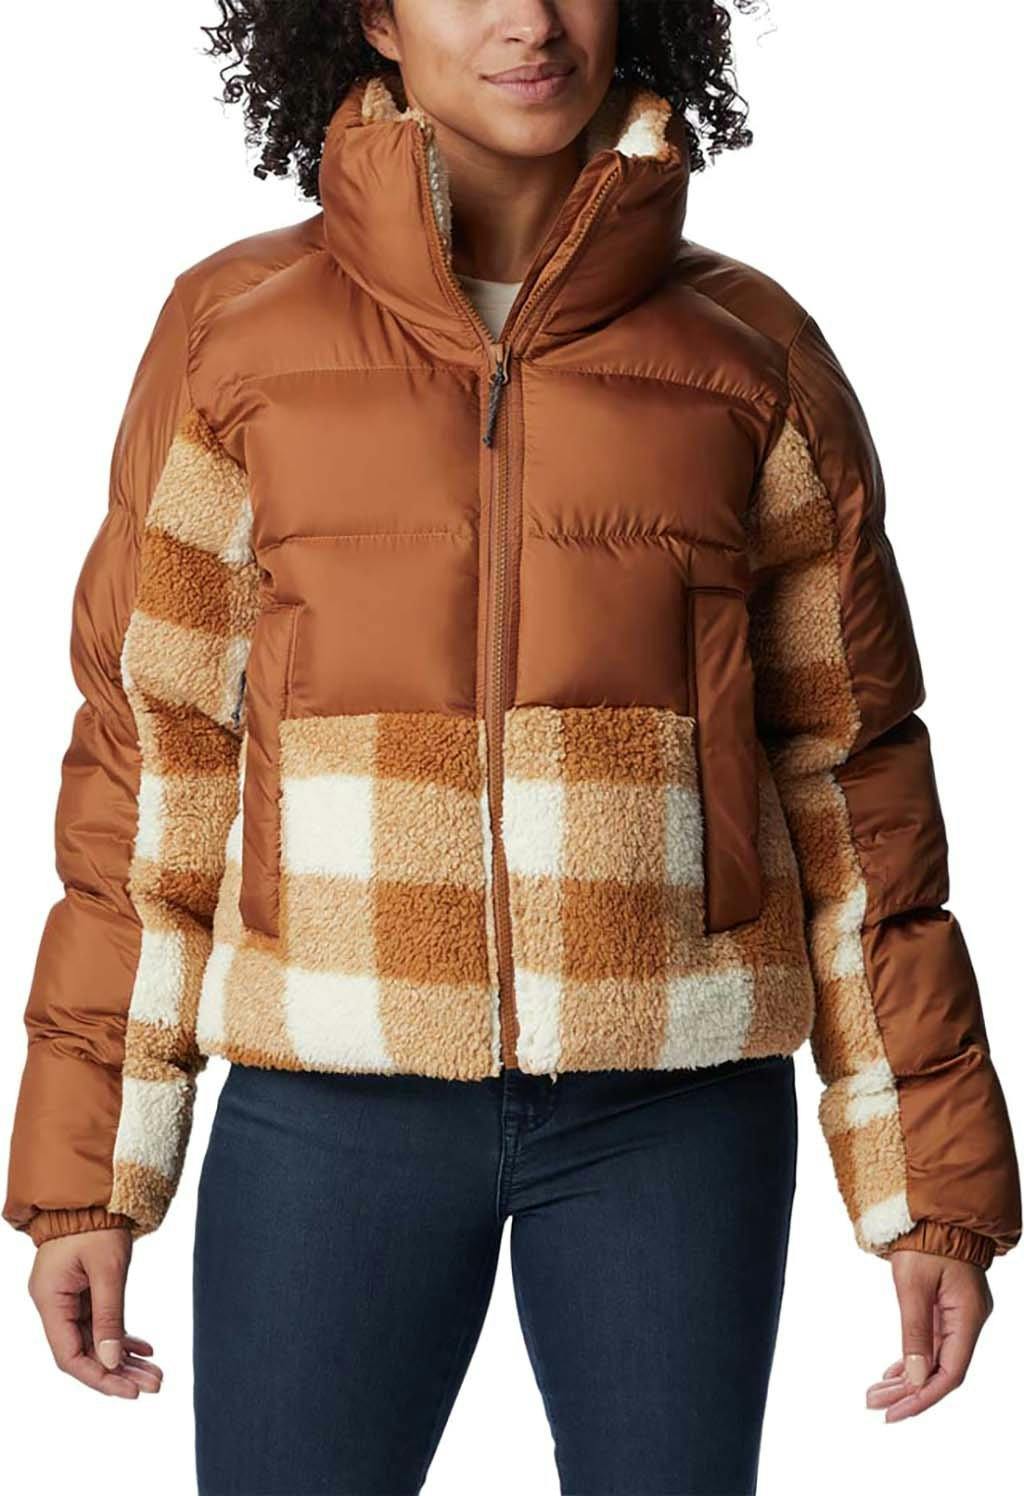 Product image for Leadbetter Point Sherpa Hybrid Jacket - Women's